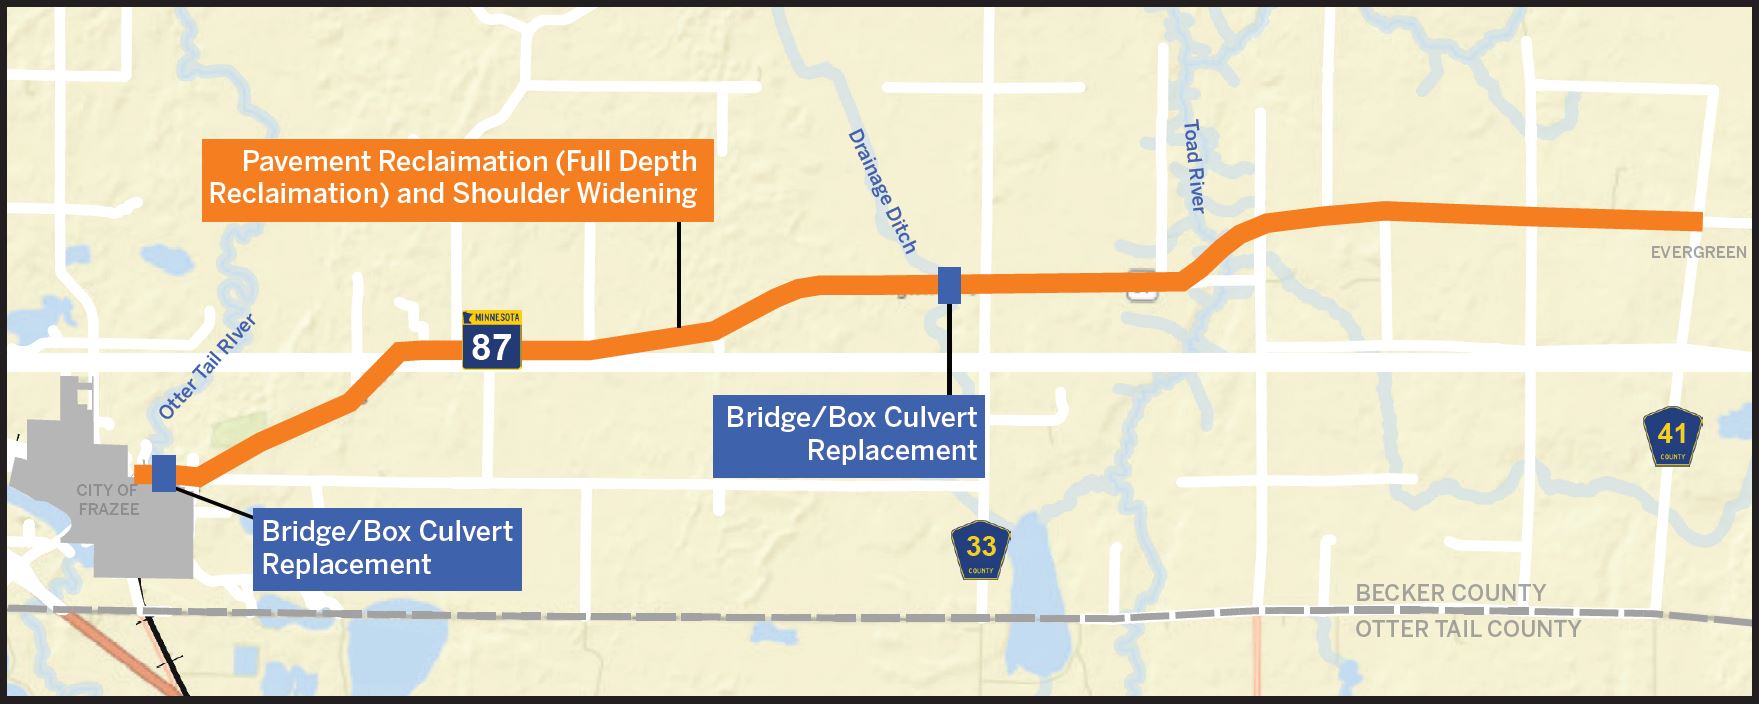 Project map for pavement resurfacing and shoulder widening for Highway 87 from Frazee to Evergreen